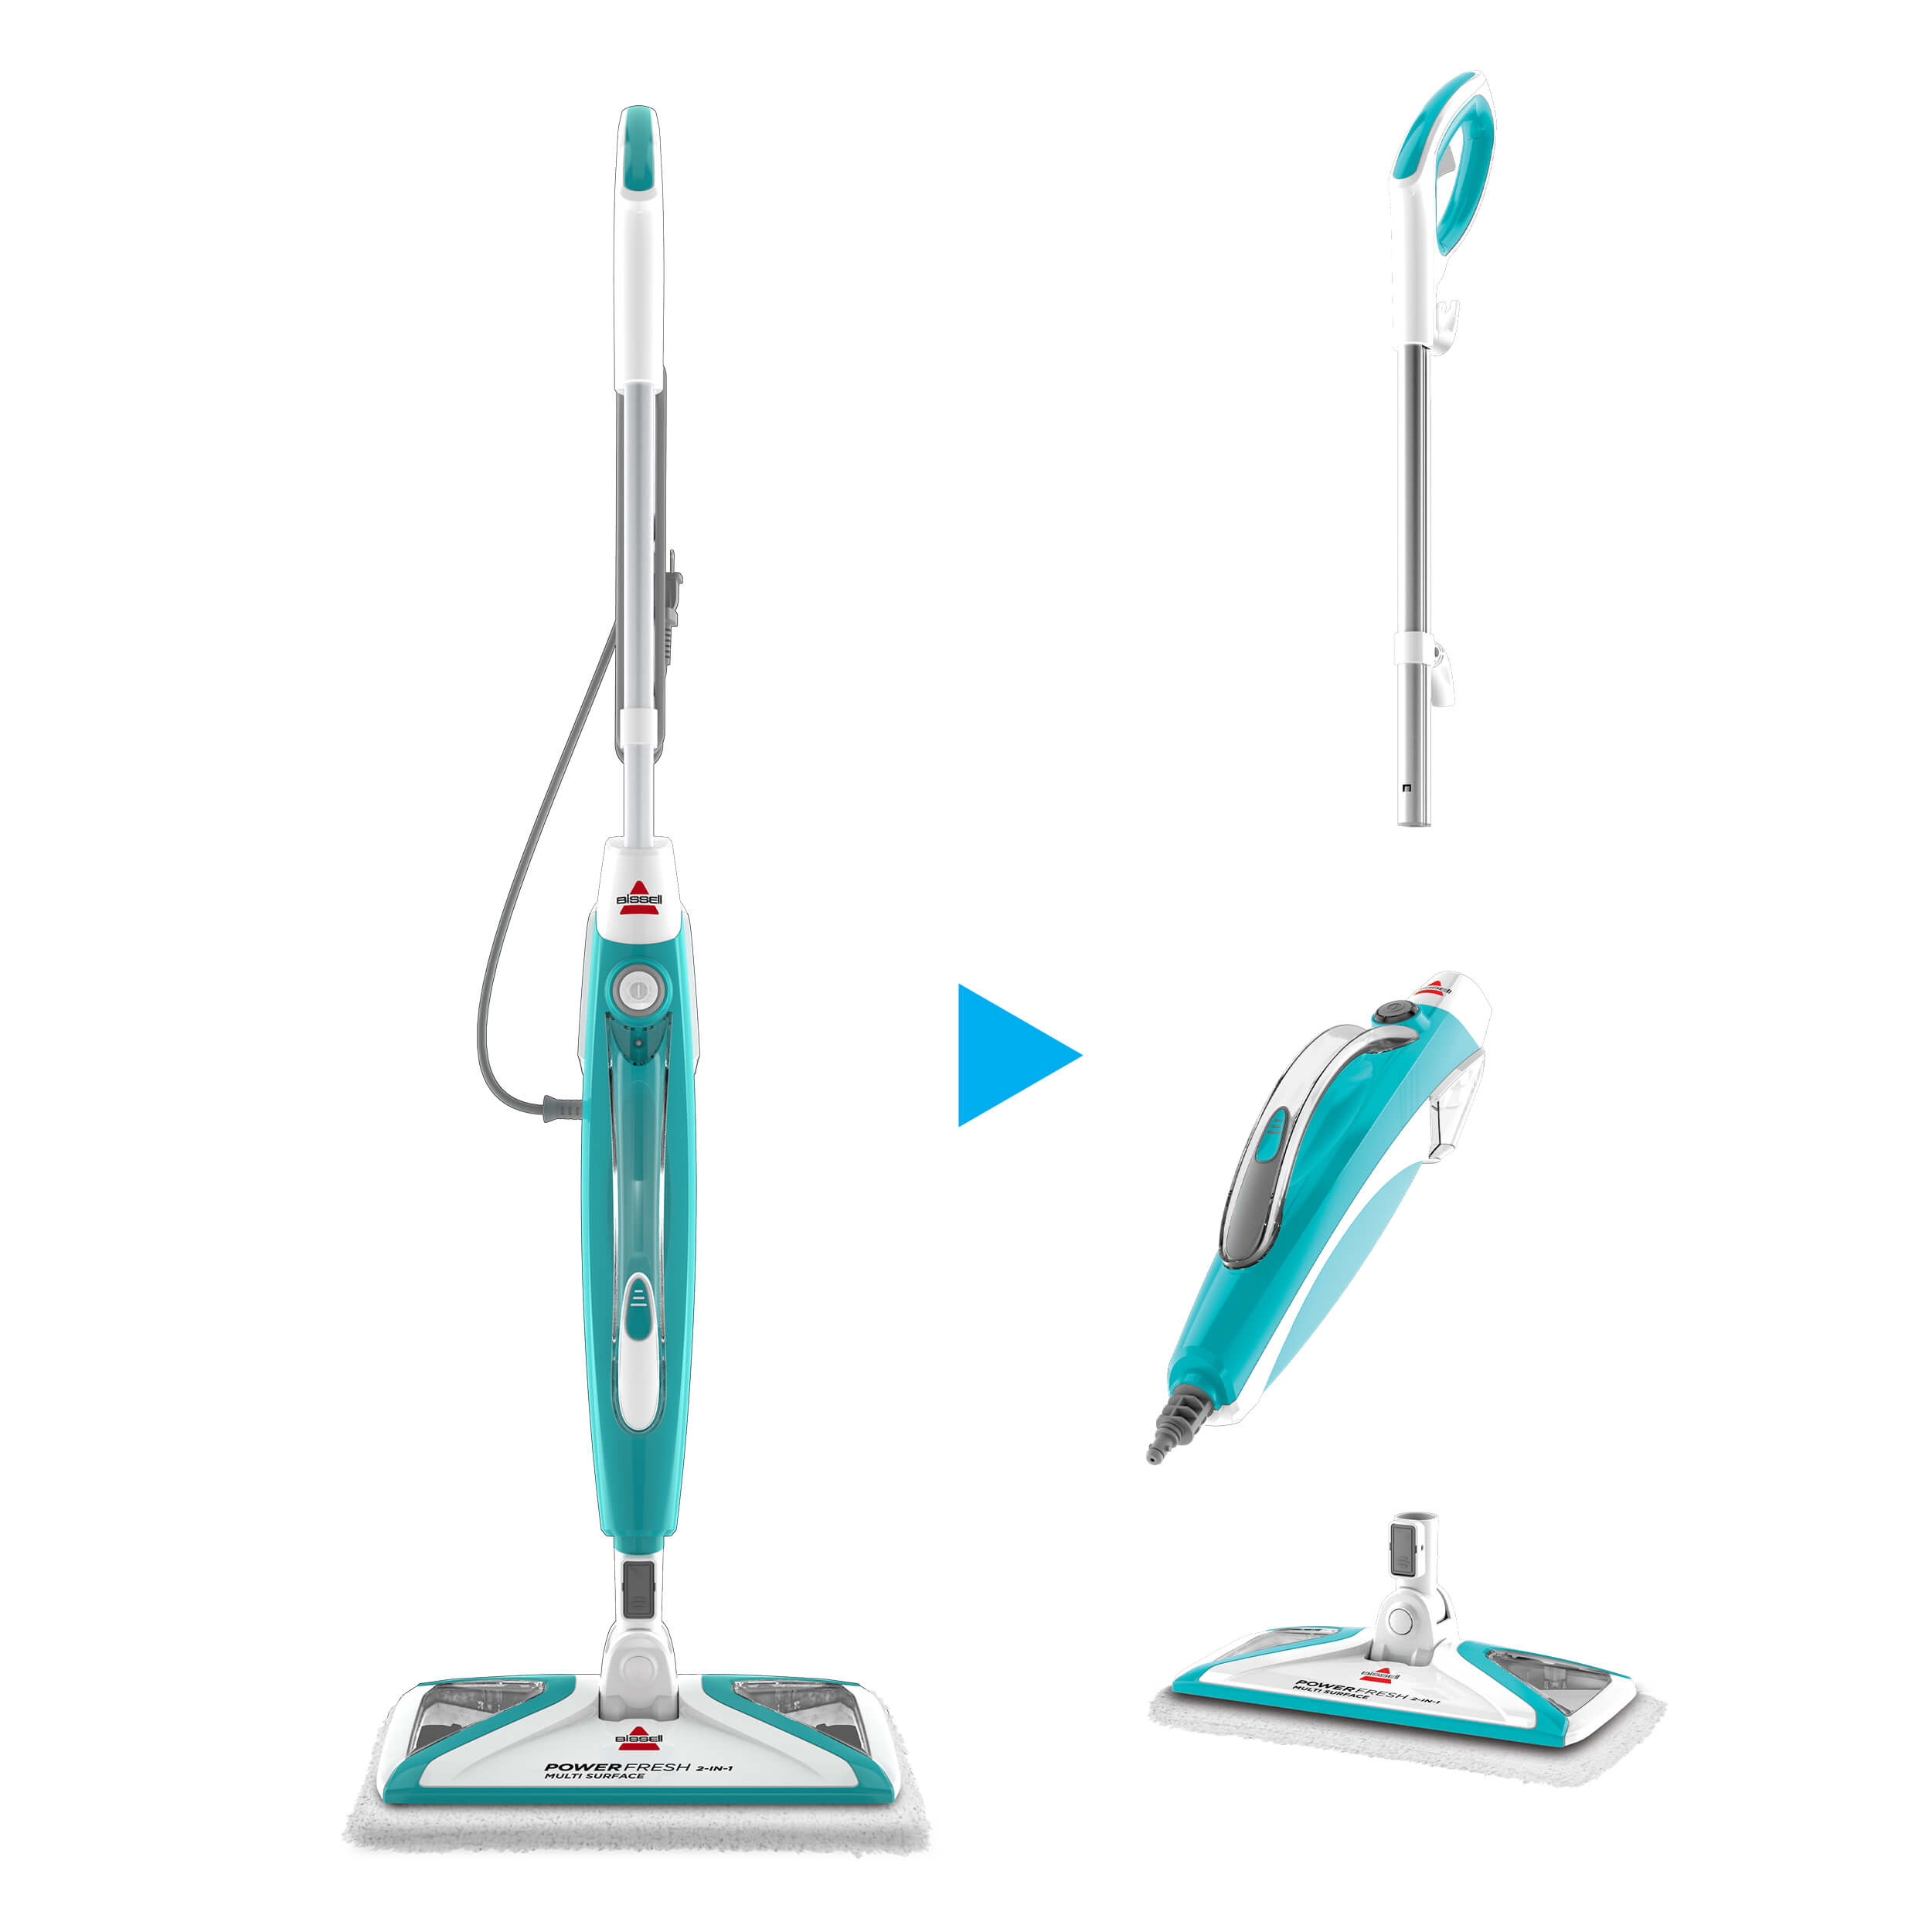  LIGHT 'N' EASY Steam Mop Cleaners 9-in-1 with